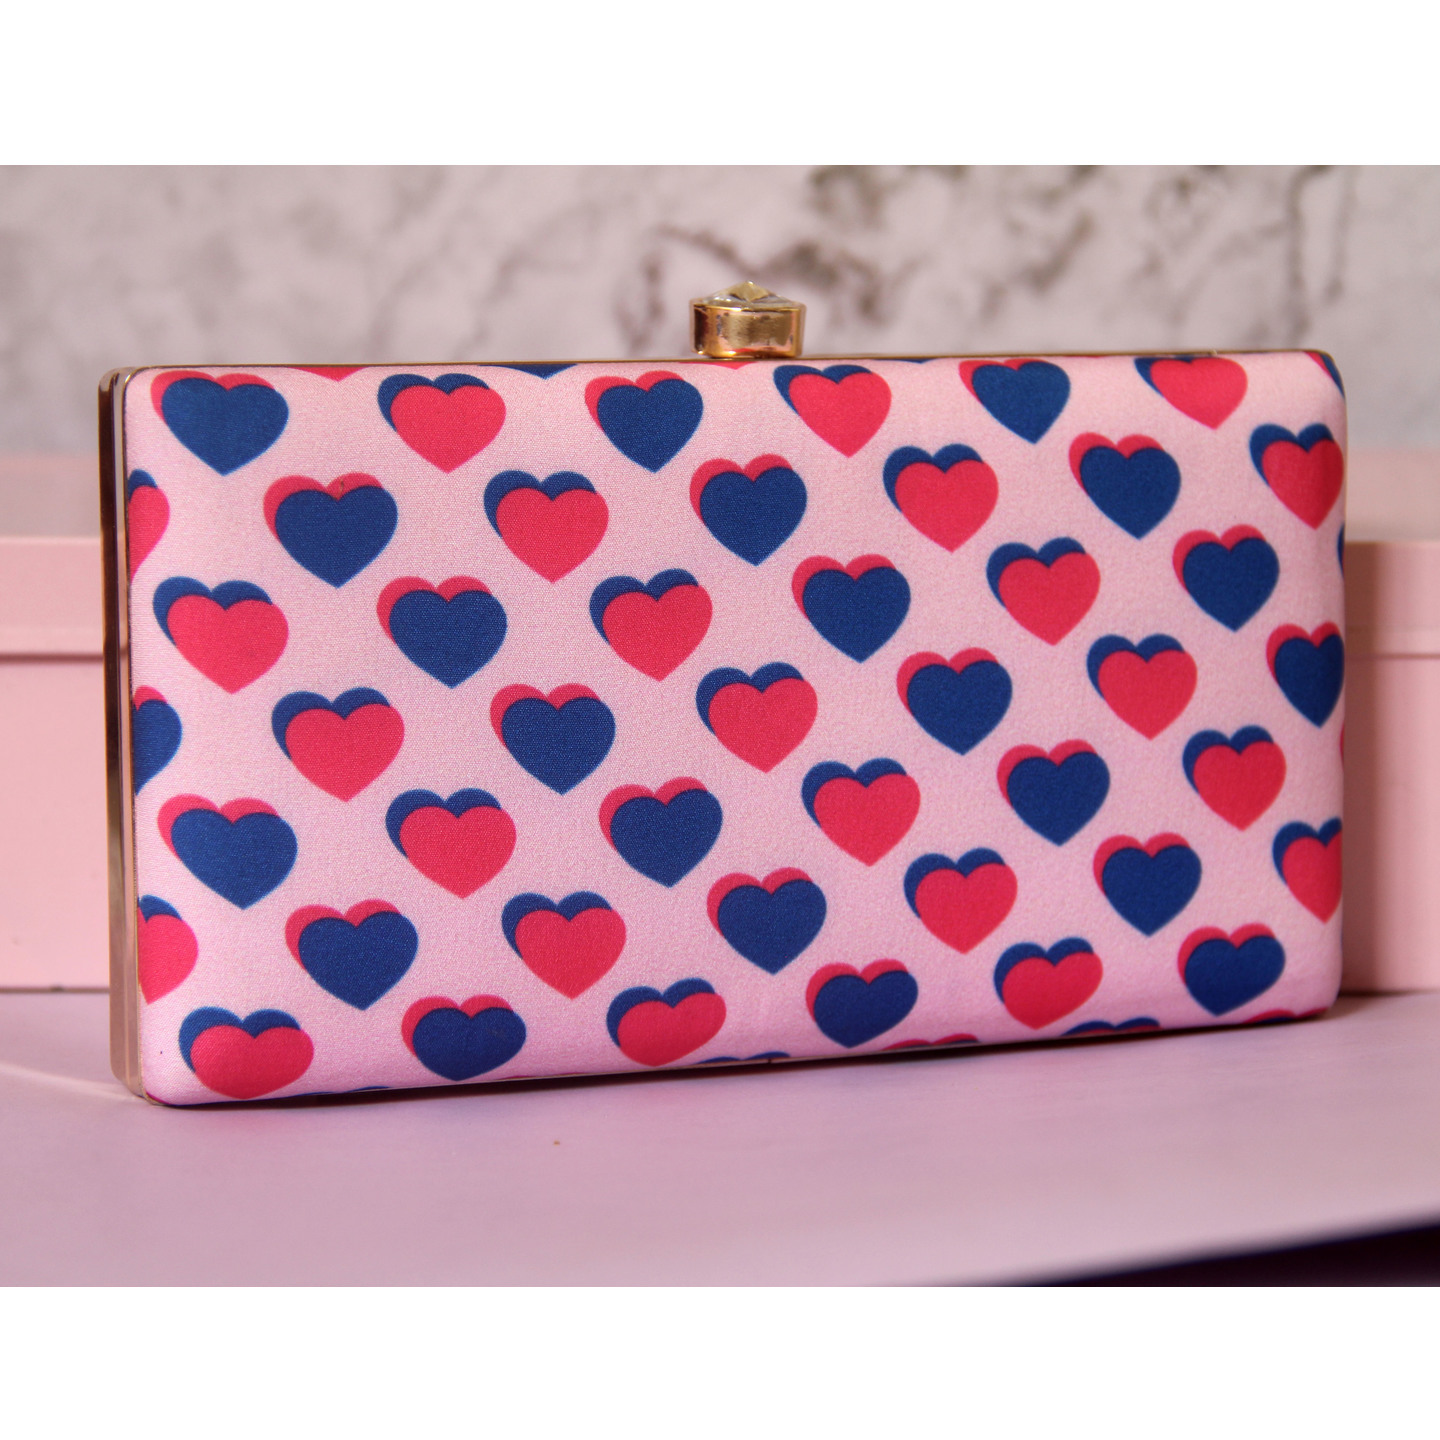 Pink-Blue Hearts Printed CLutch